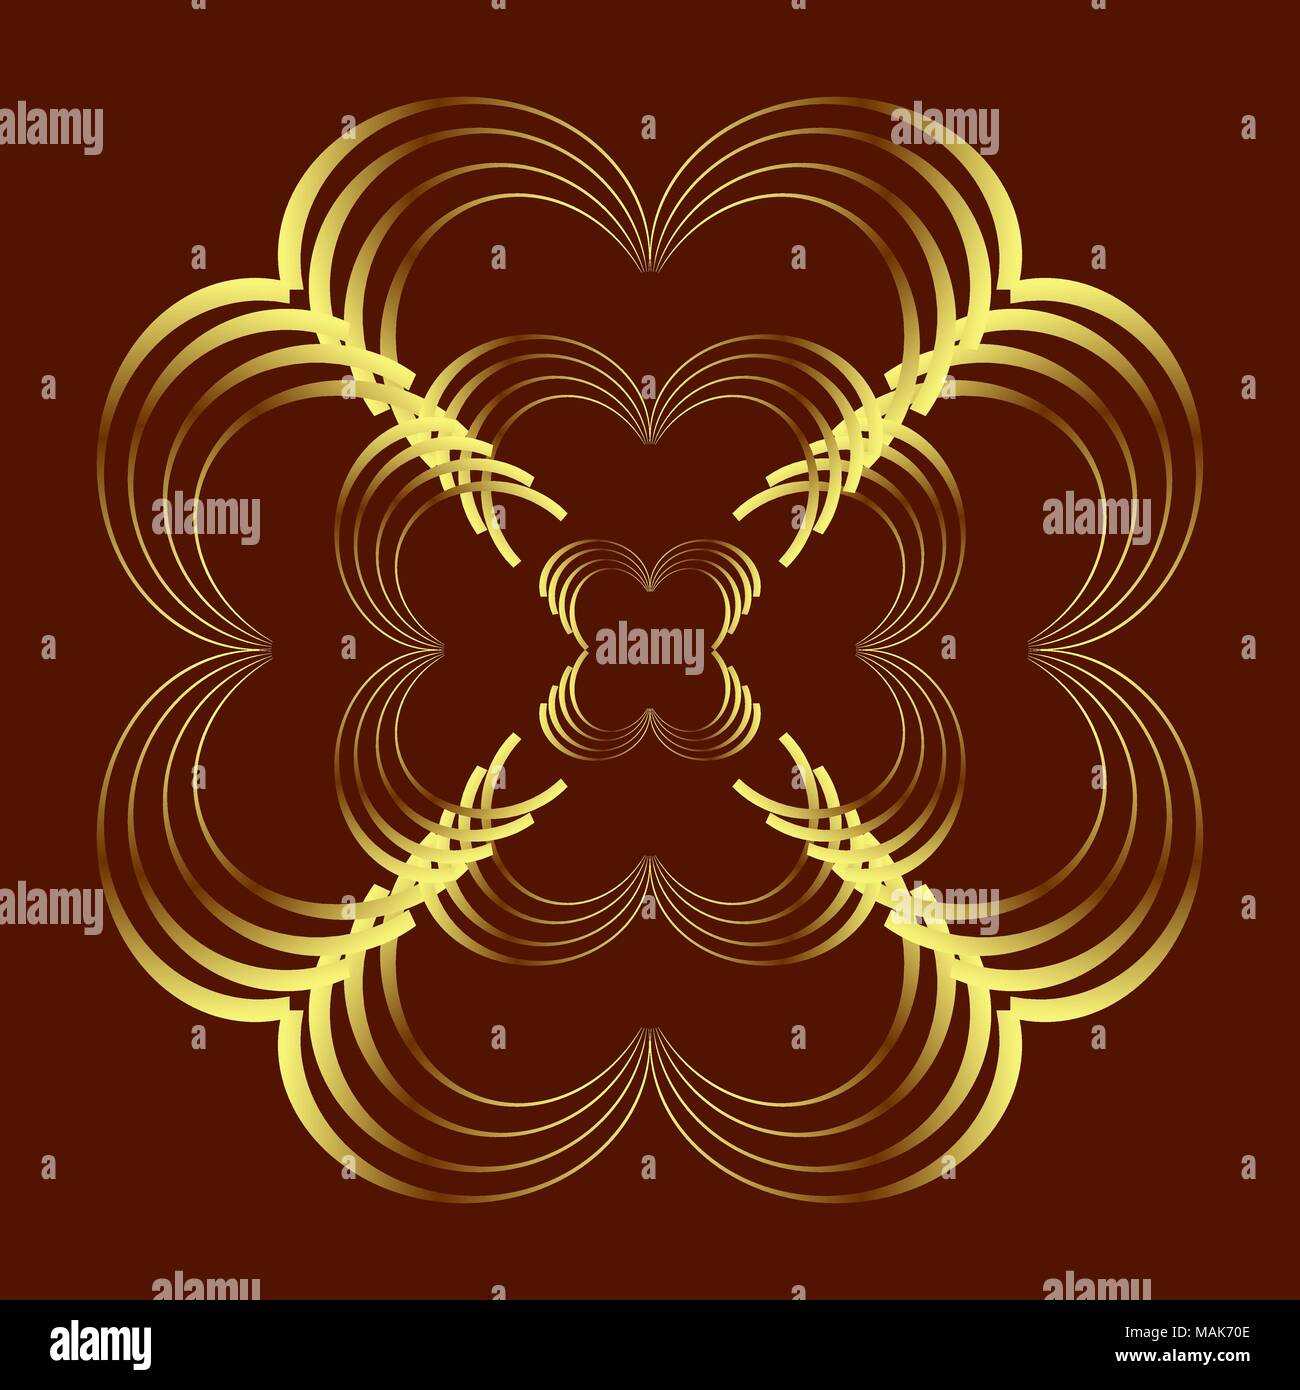 Abstract curve pattern in gold colored on dark brown background; heart, flower shapes. Vector illustration. Stock Vector